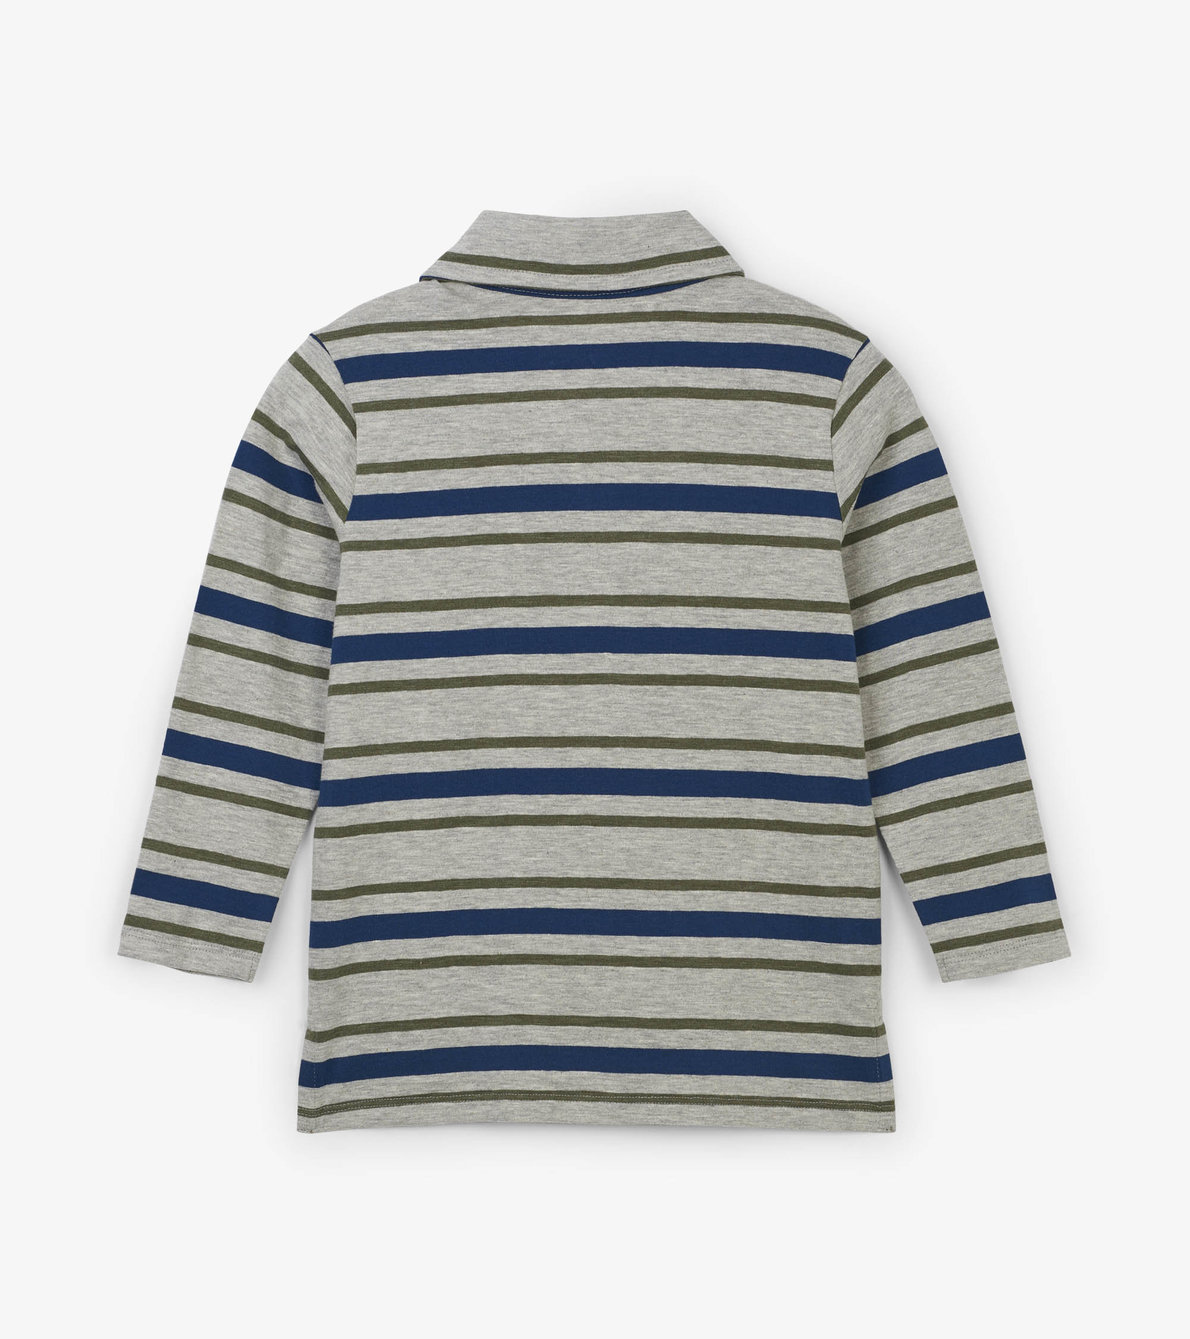 View larger image of Grey Stripe Long Sleeve Polo Tee